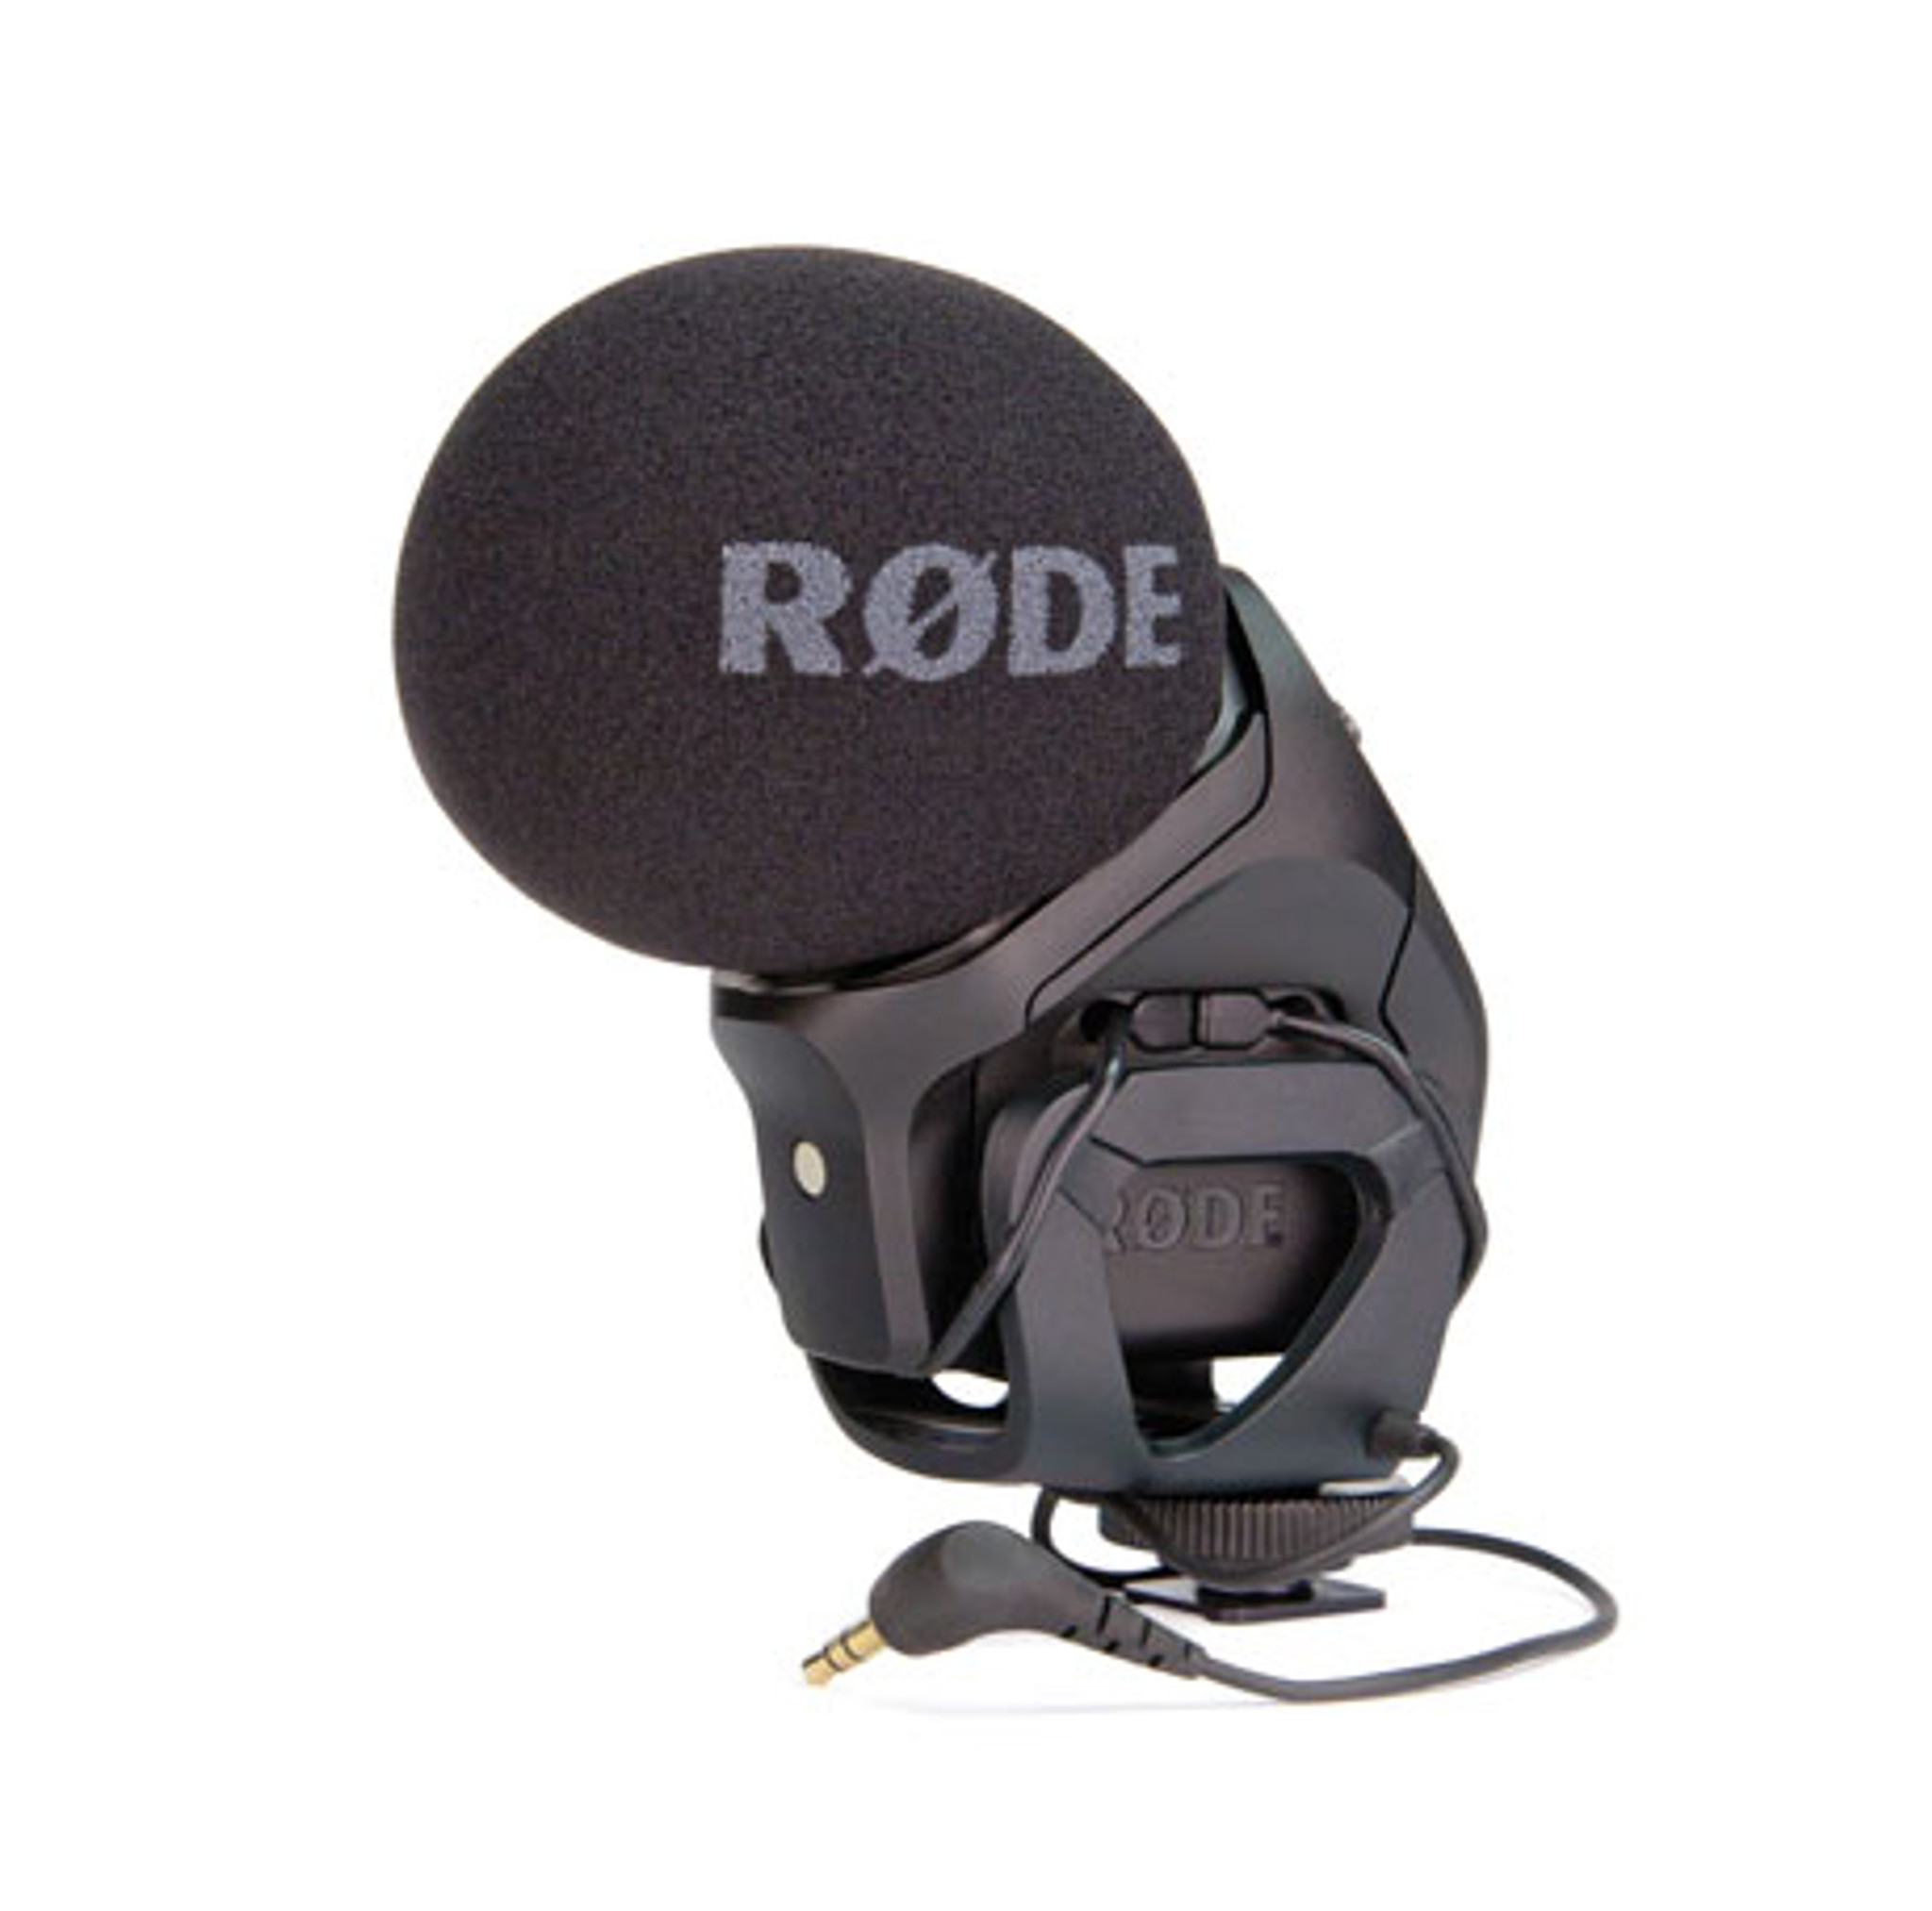 Rode VideoMicro Compact Cardioid Microphone for dSLR Camera, iPad